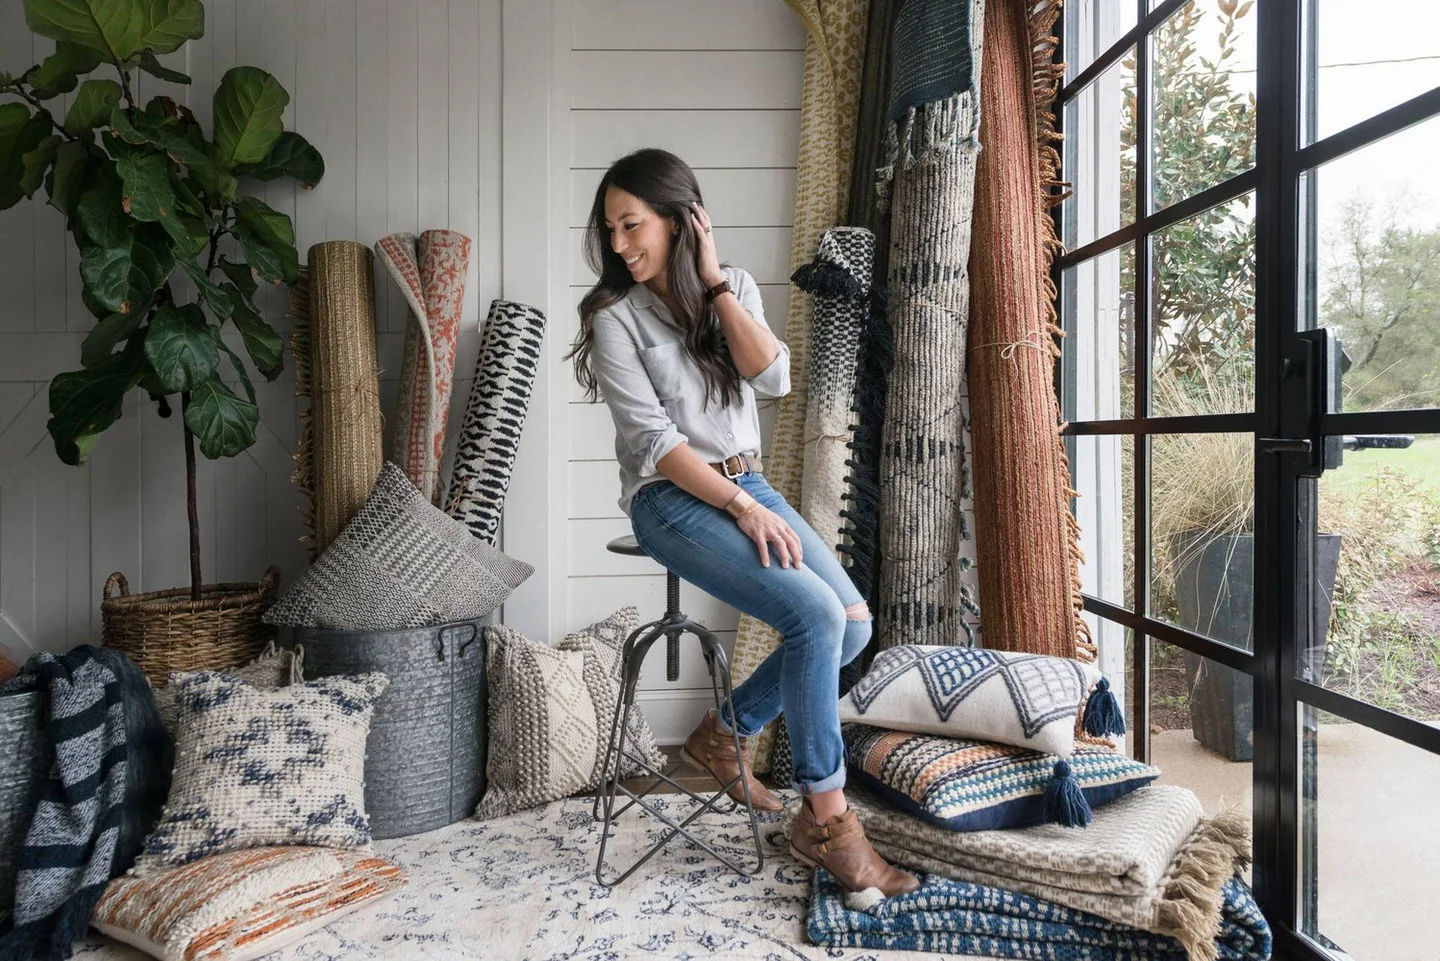 What style does Joanna Gaines use?